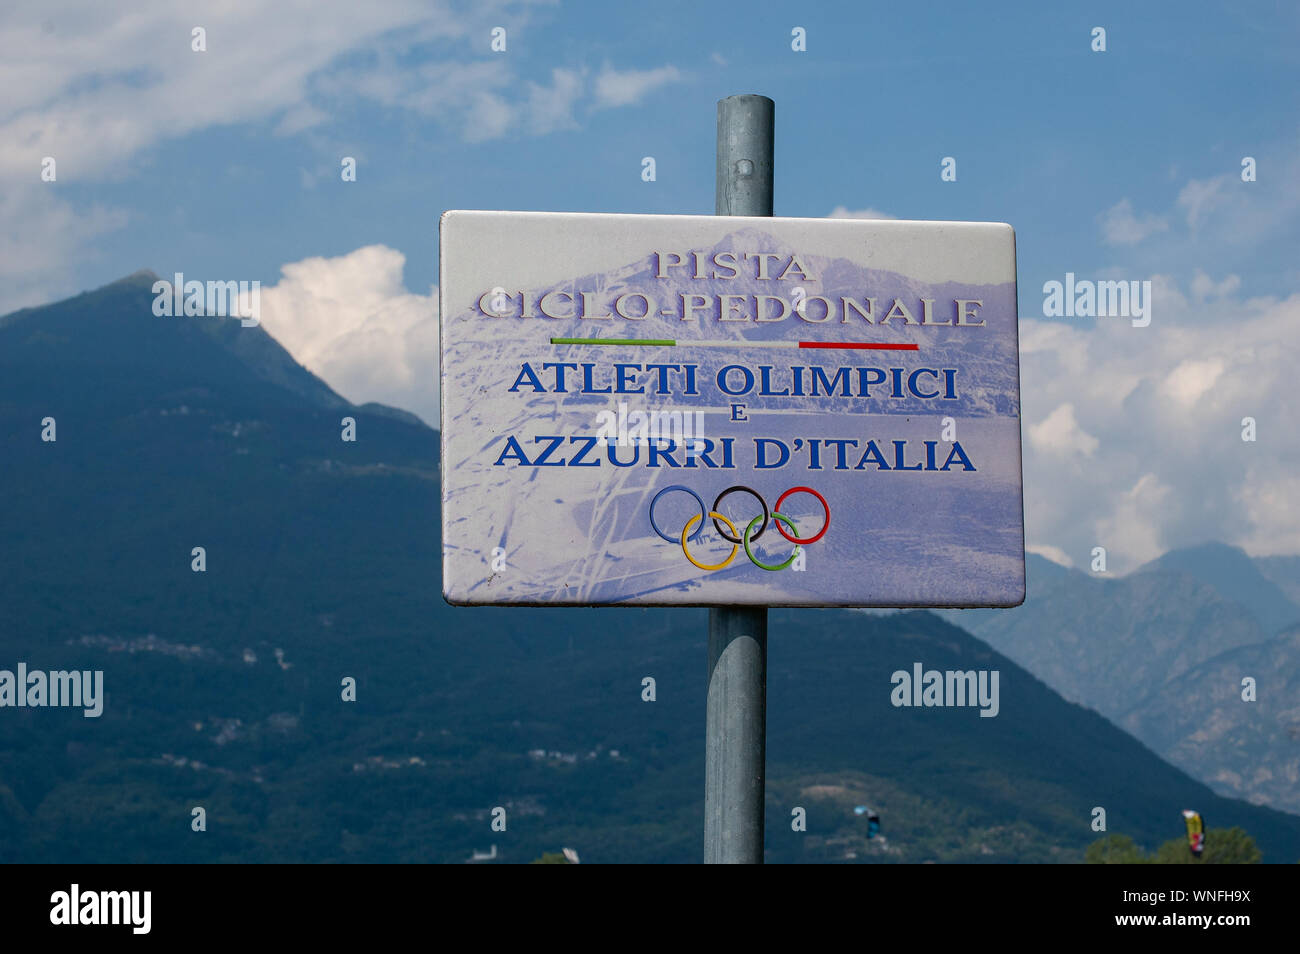 Lake Como, Italy - July 21, 2019. Bicycle and Walking Path Sign. Olympic and Italian athletes from Italy. Alp mountains on background Stock Photo